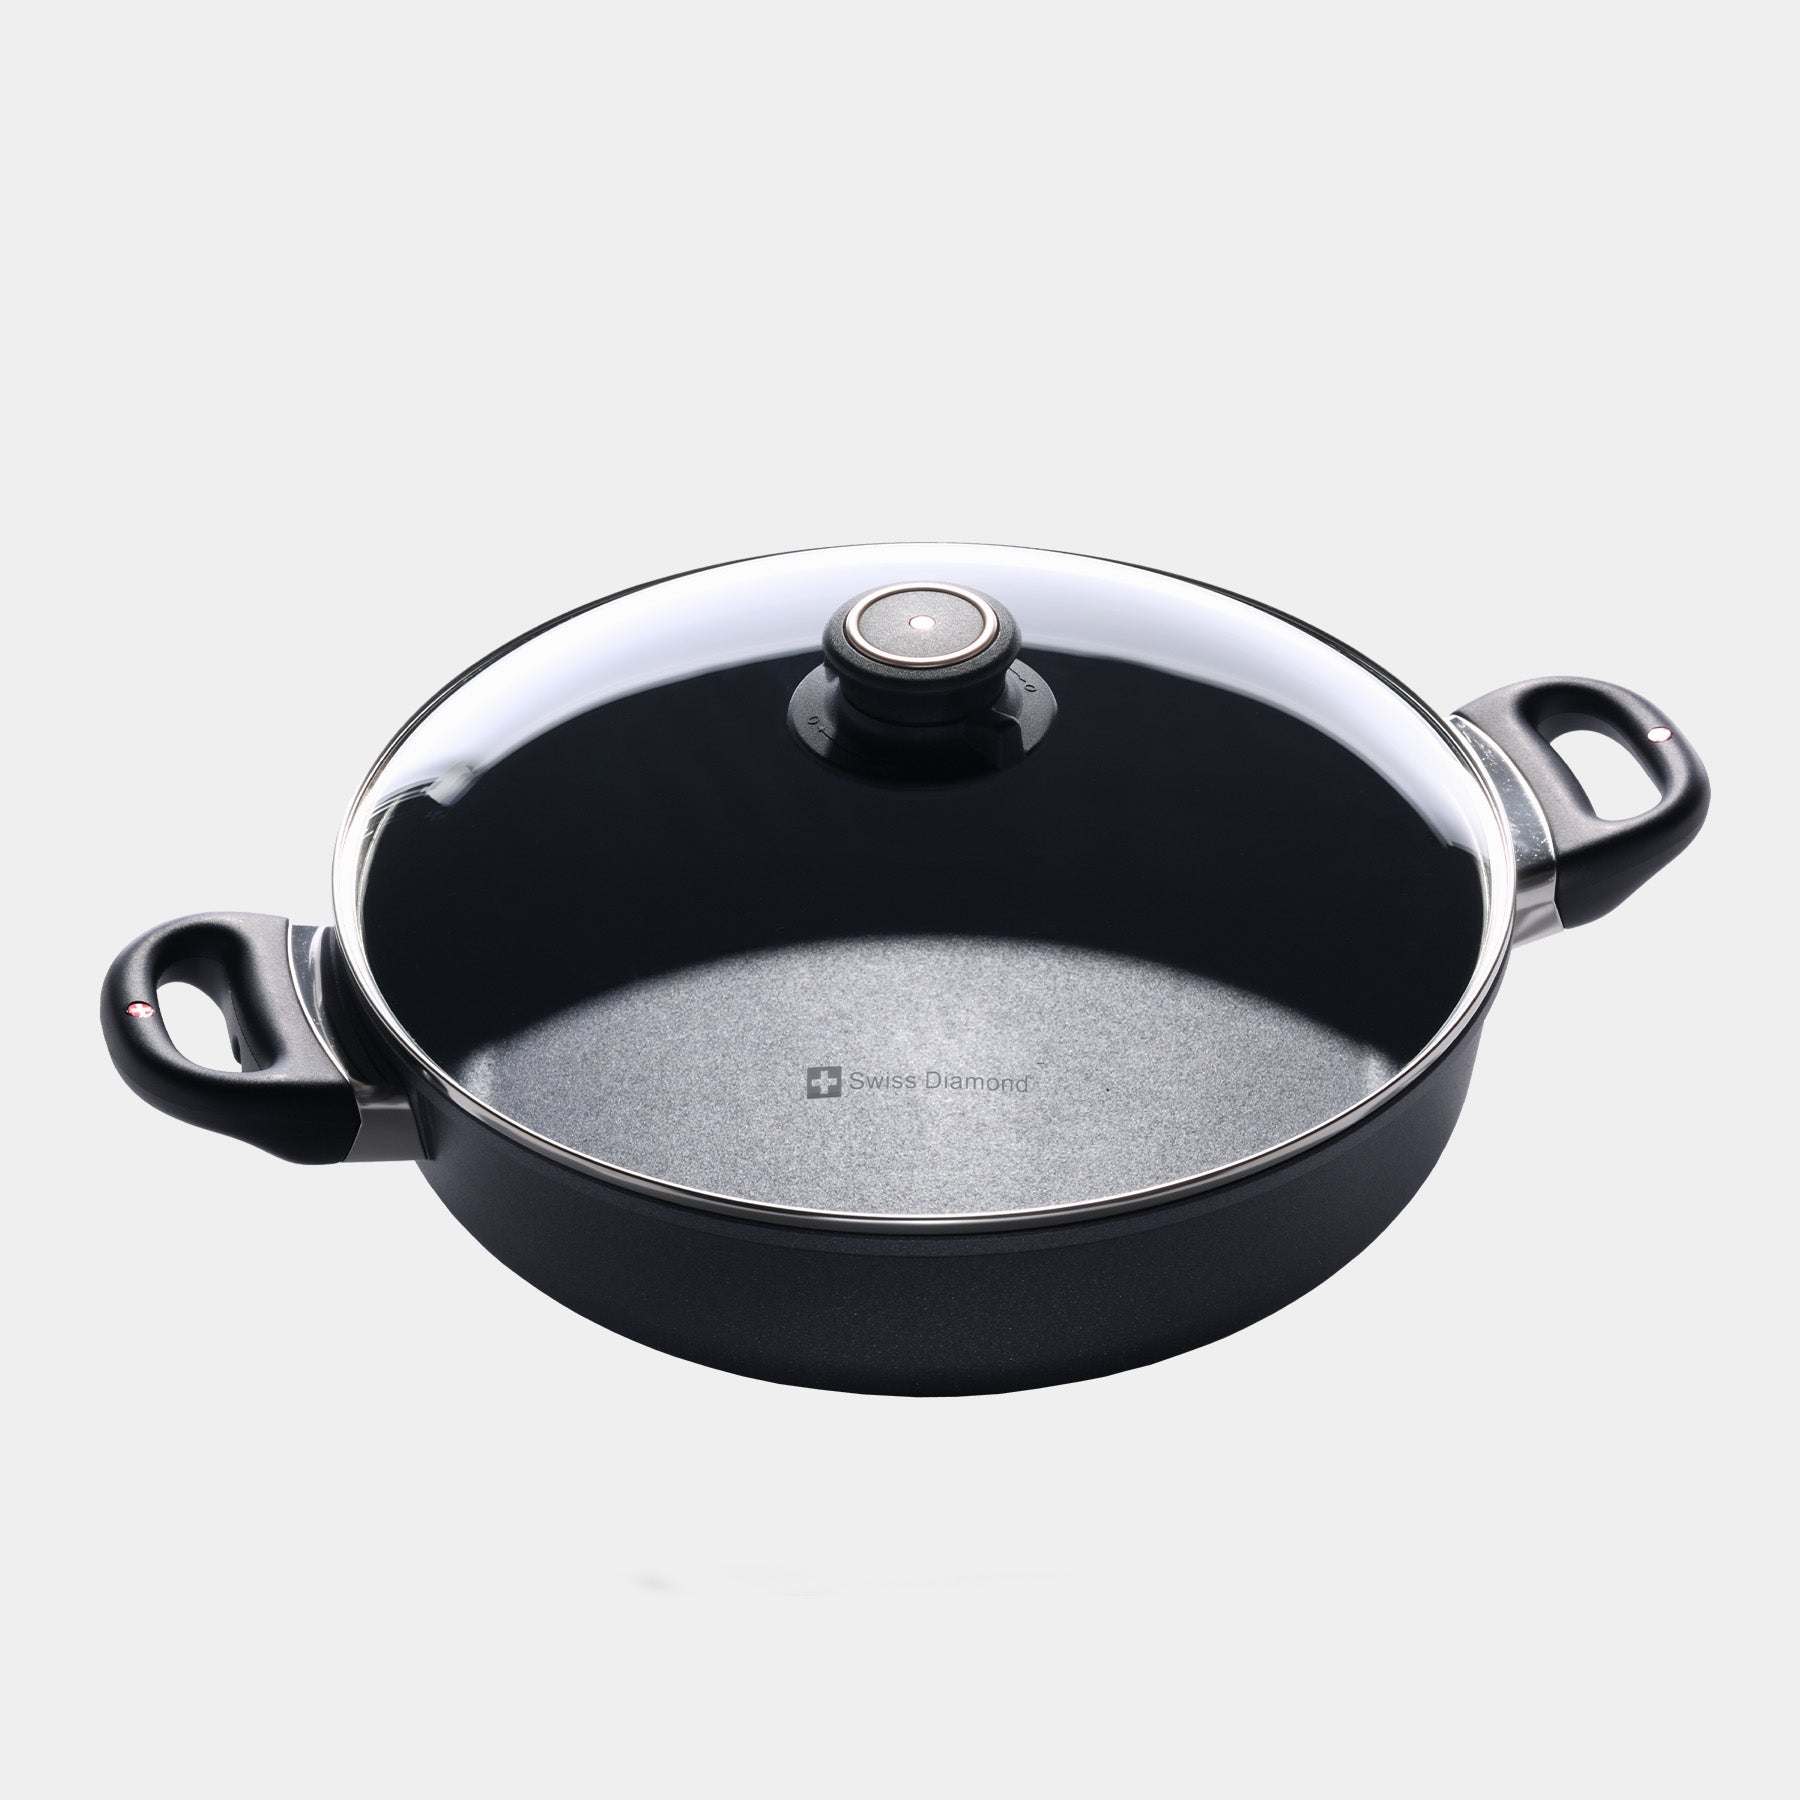 HD Nonstick 3.7 qt Sauteuse with Glass Lid - Induction